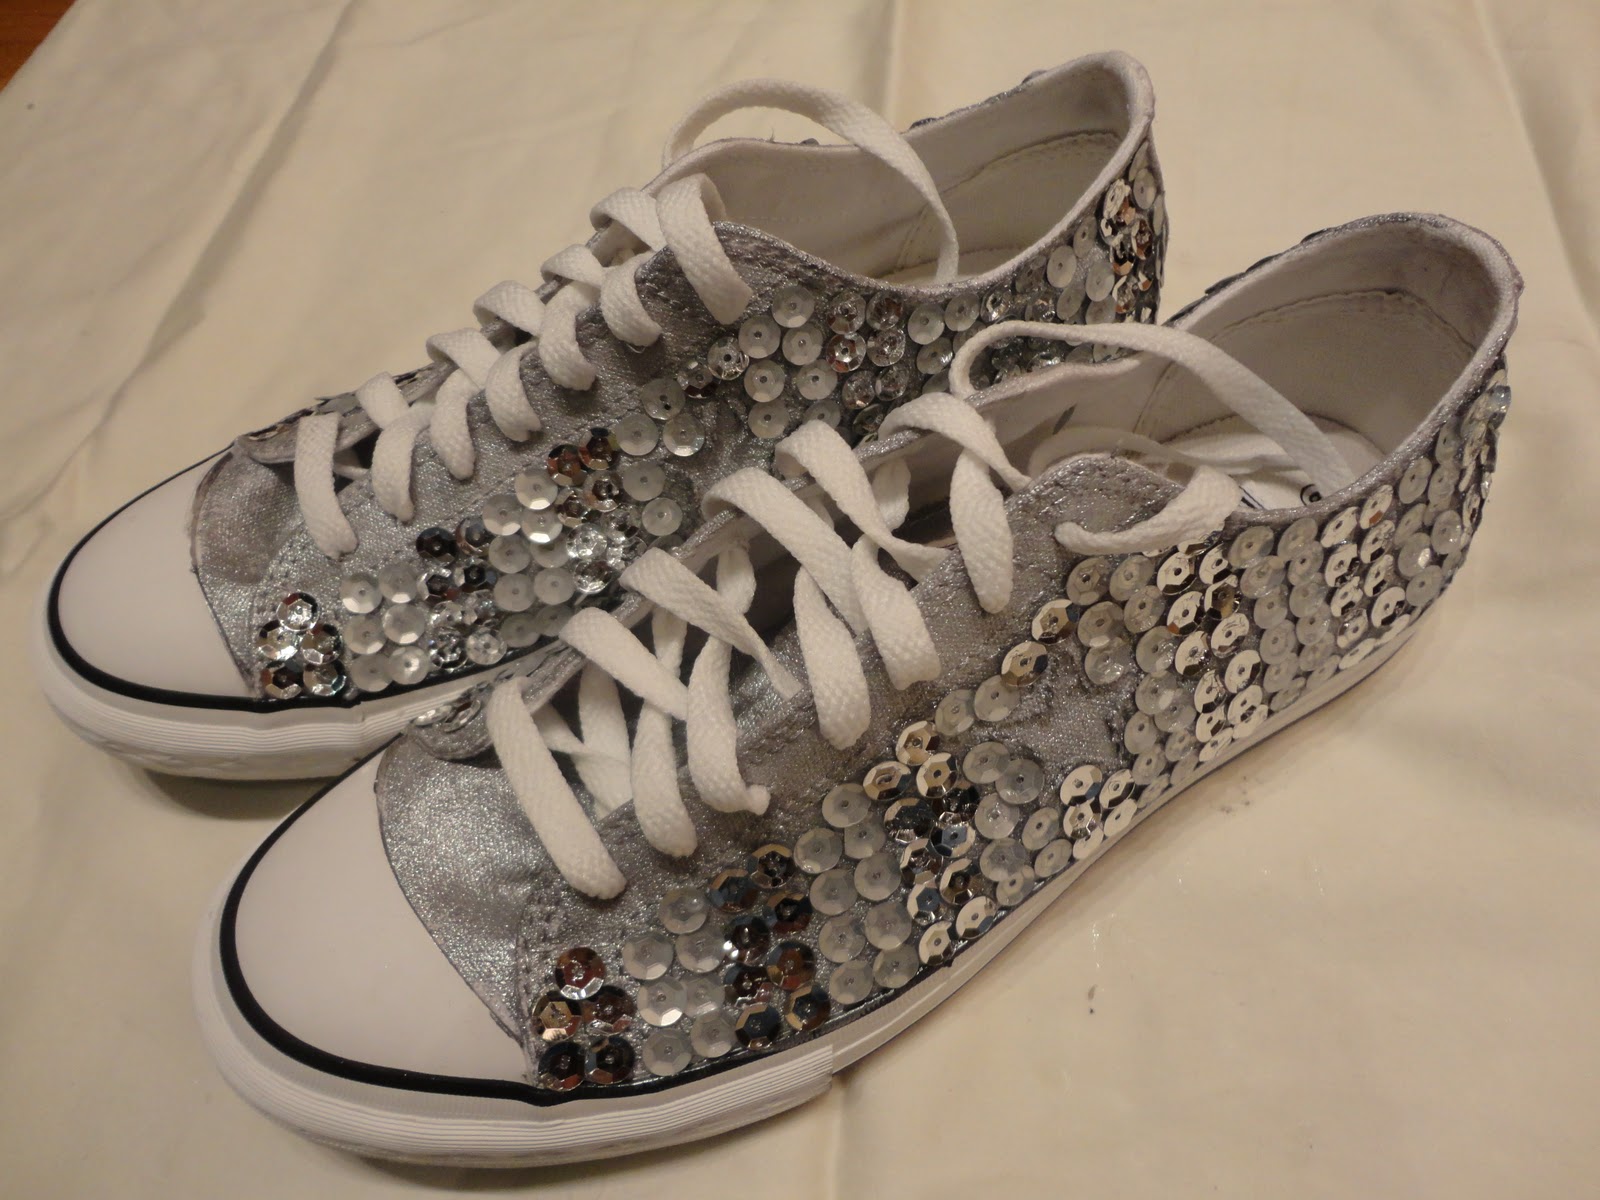 DIY Glitter Sneakers // Inspired by Miu Miu Embellished Shoes